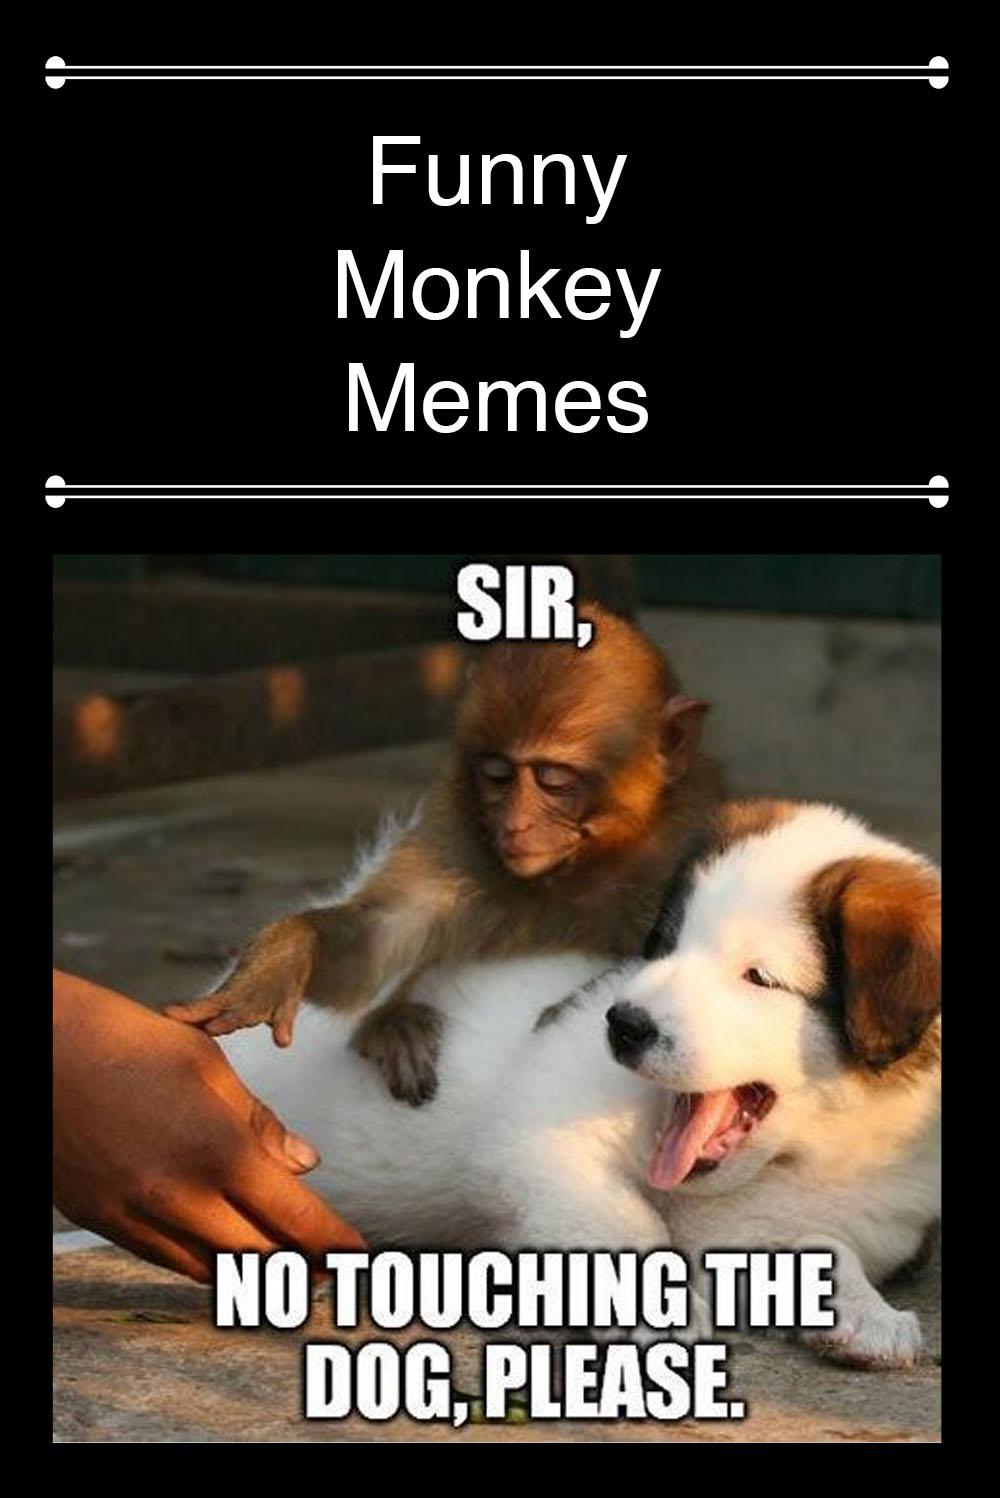 There's a Funny Monkey Meme for Every Moment in Life